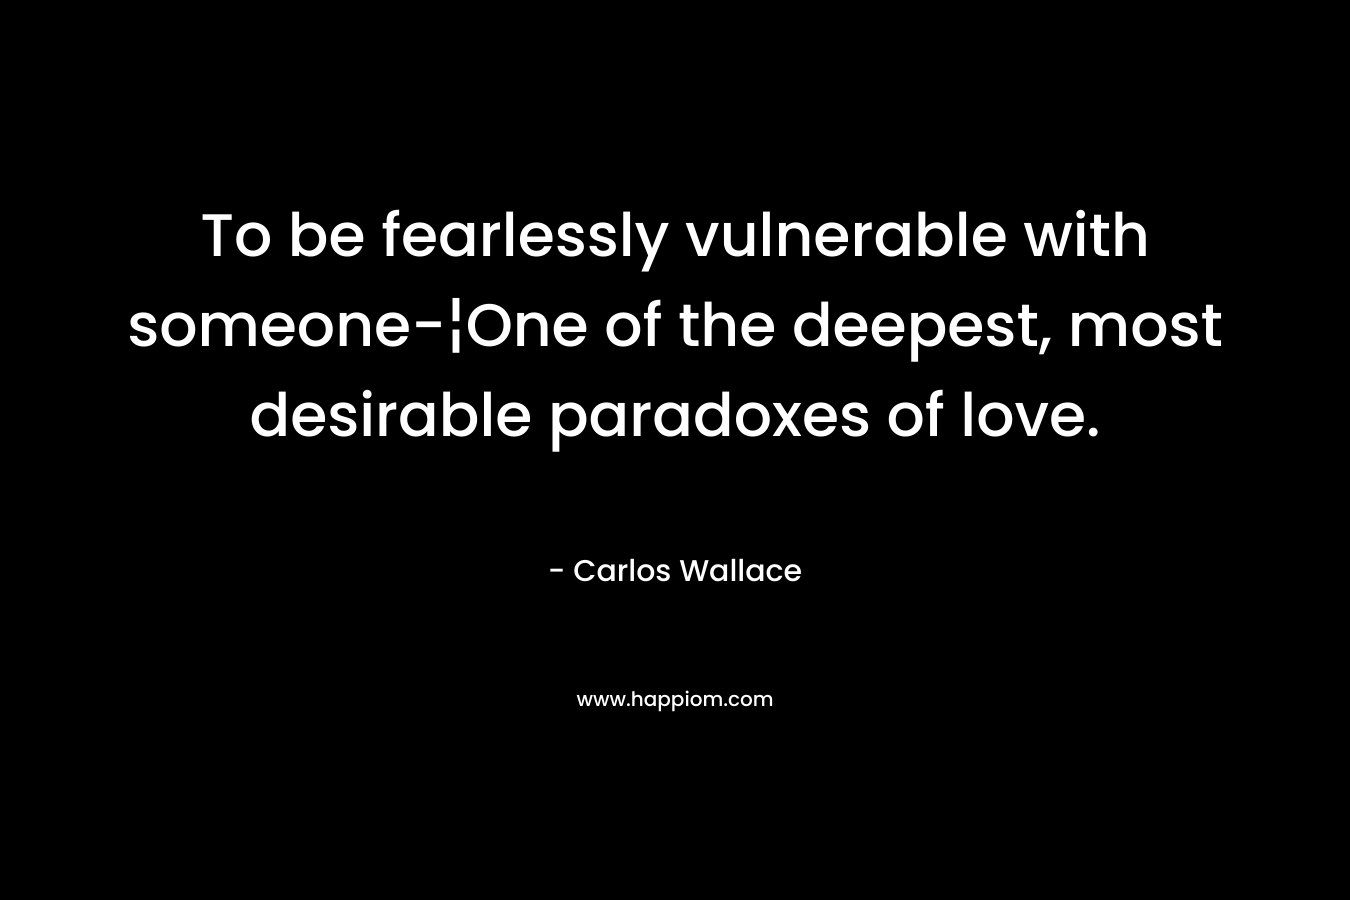 To be fearlessly vulnerable with someone-¦One of the deepest, most desirable paradoxes of love.